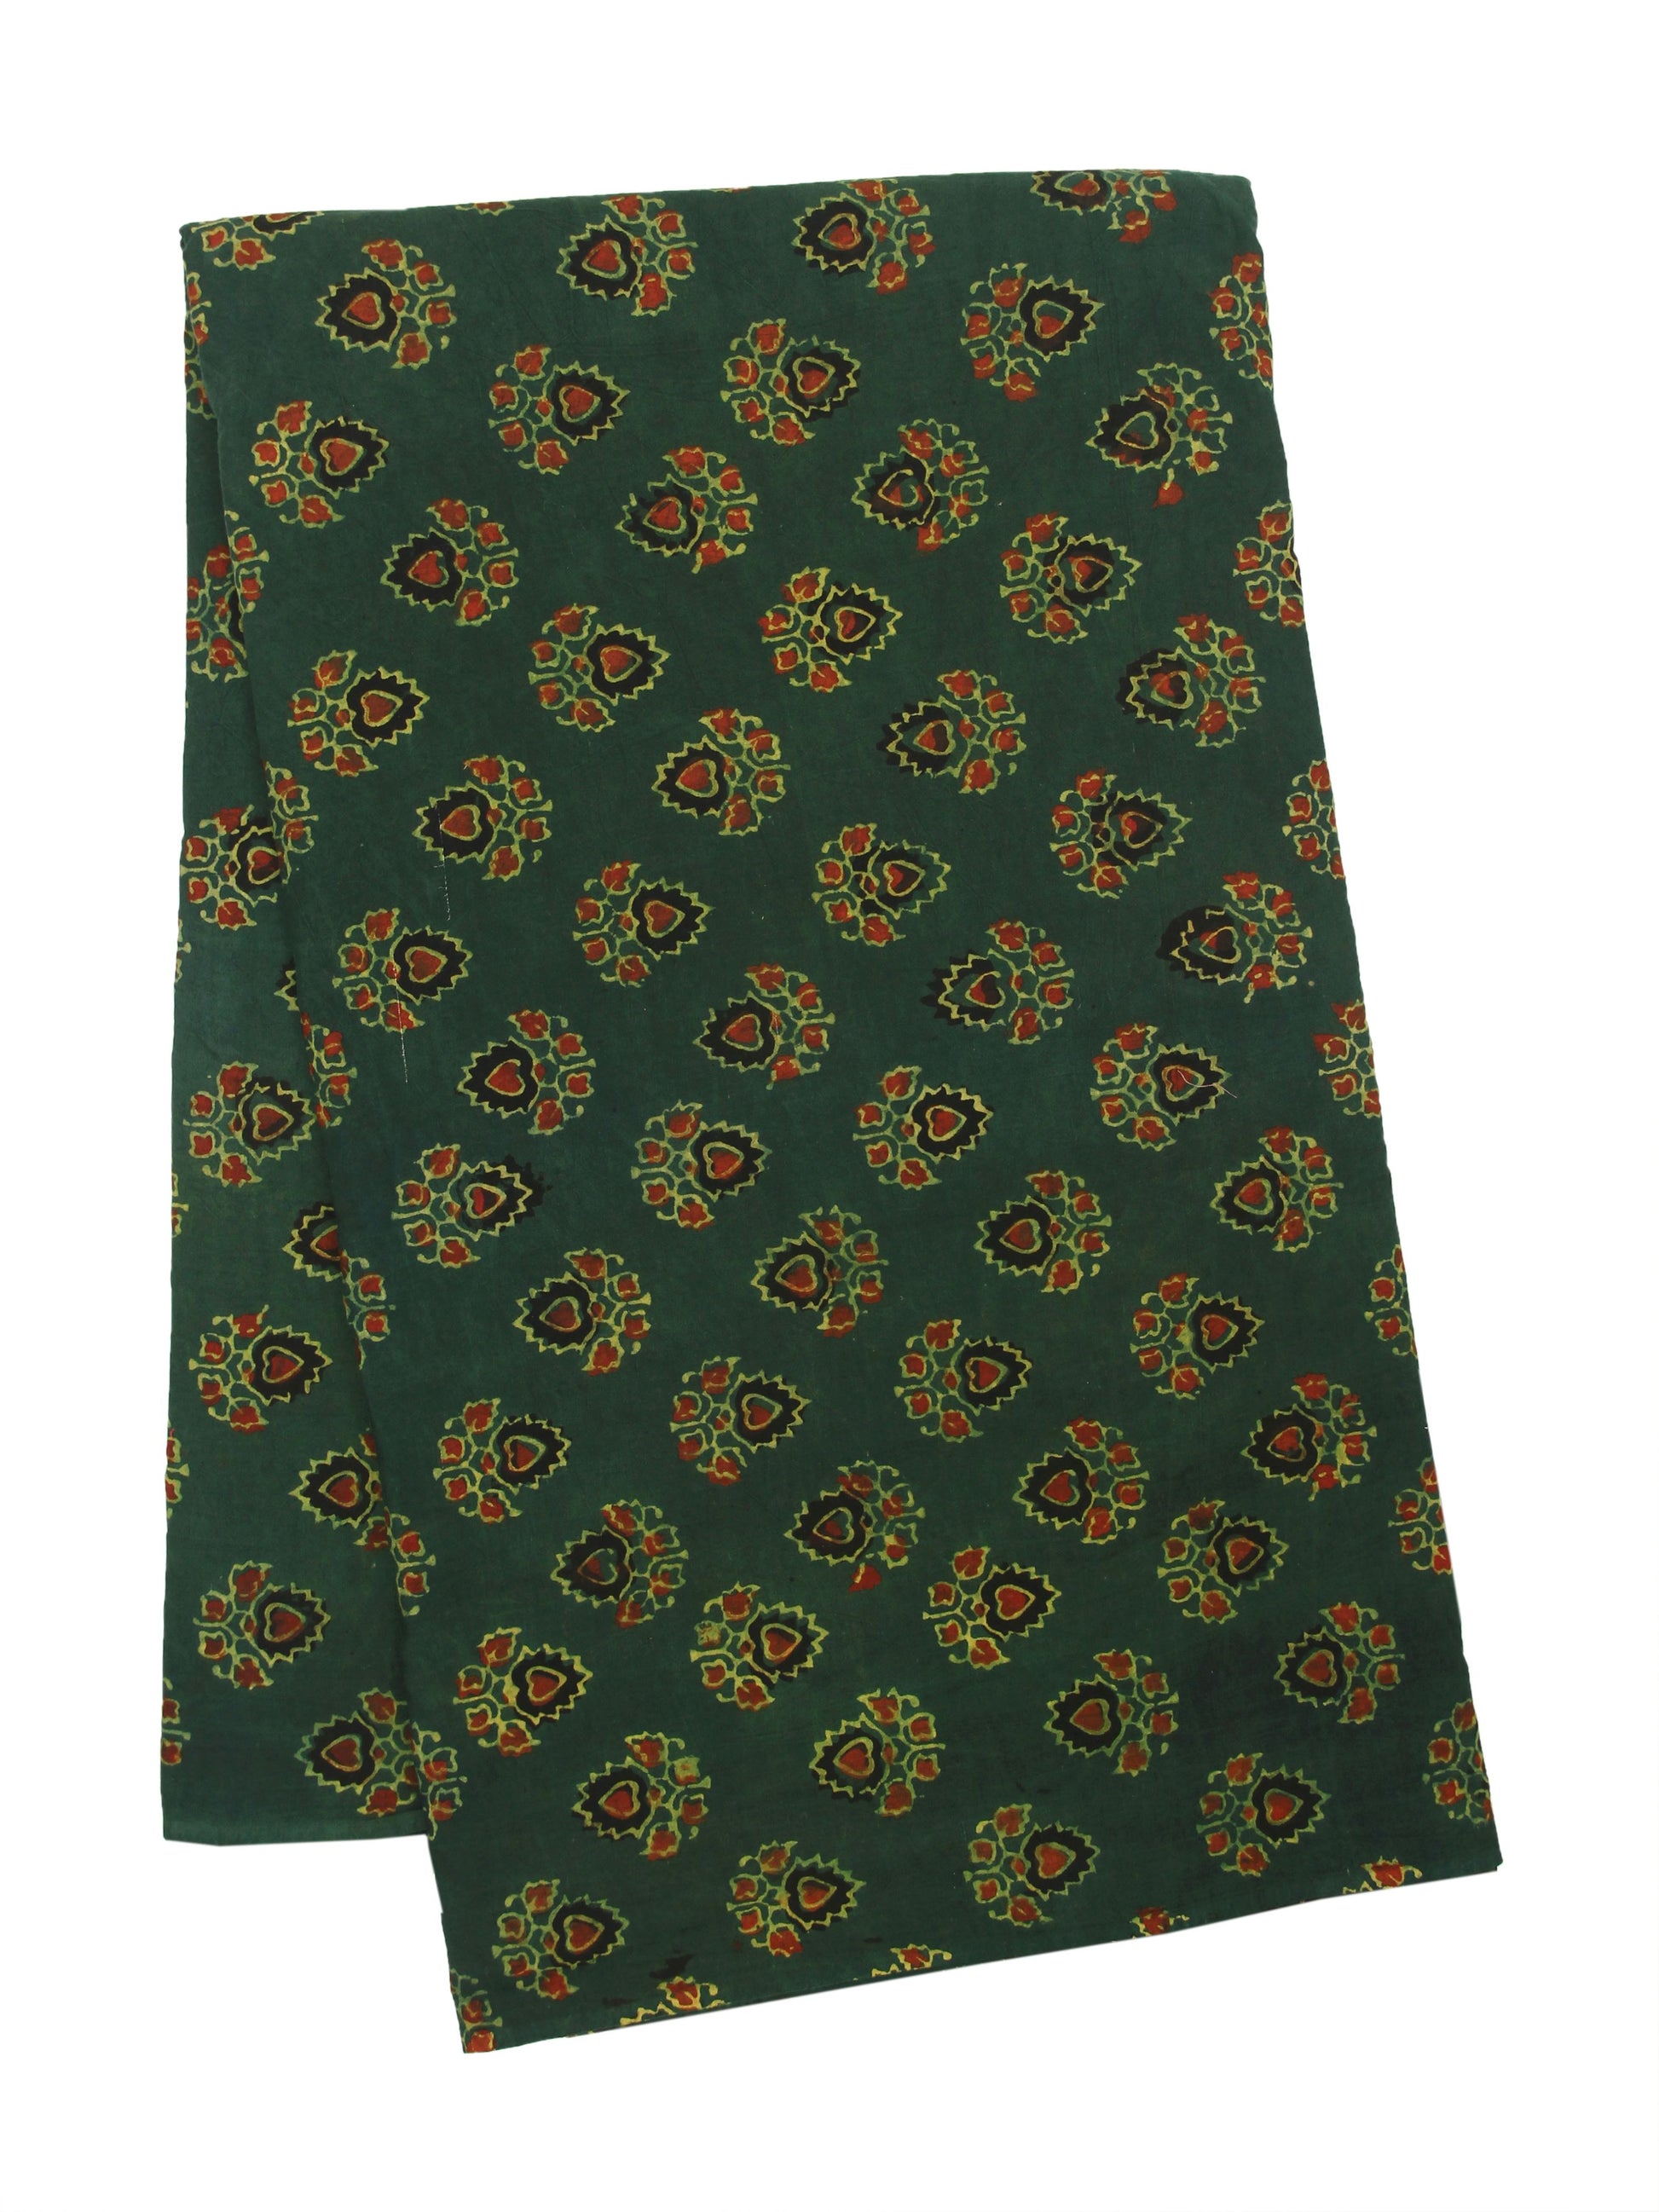 Ajrakh hand block print fabric in green color, Green ajrakh fabric, Slow fashion